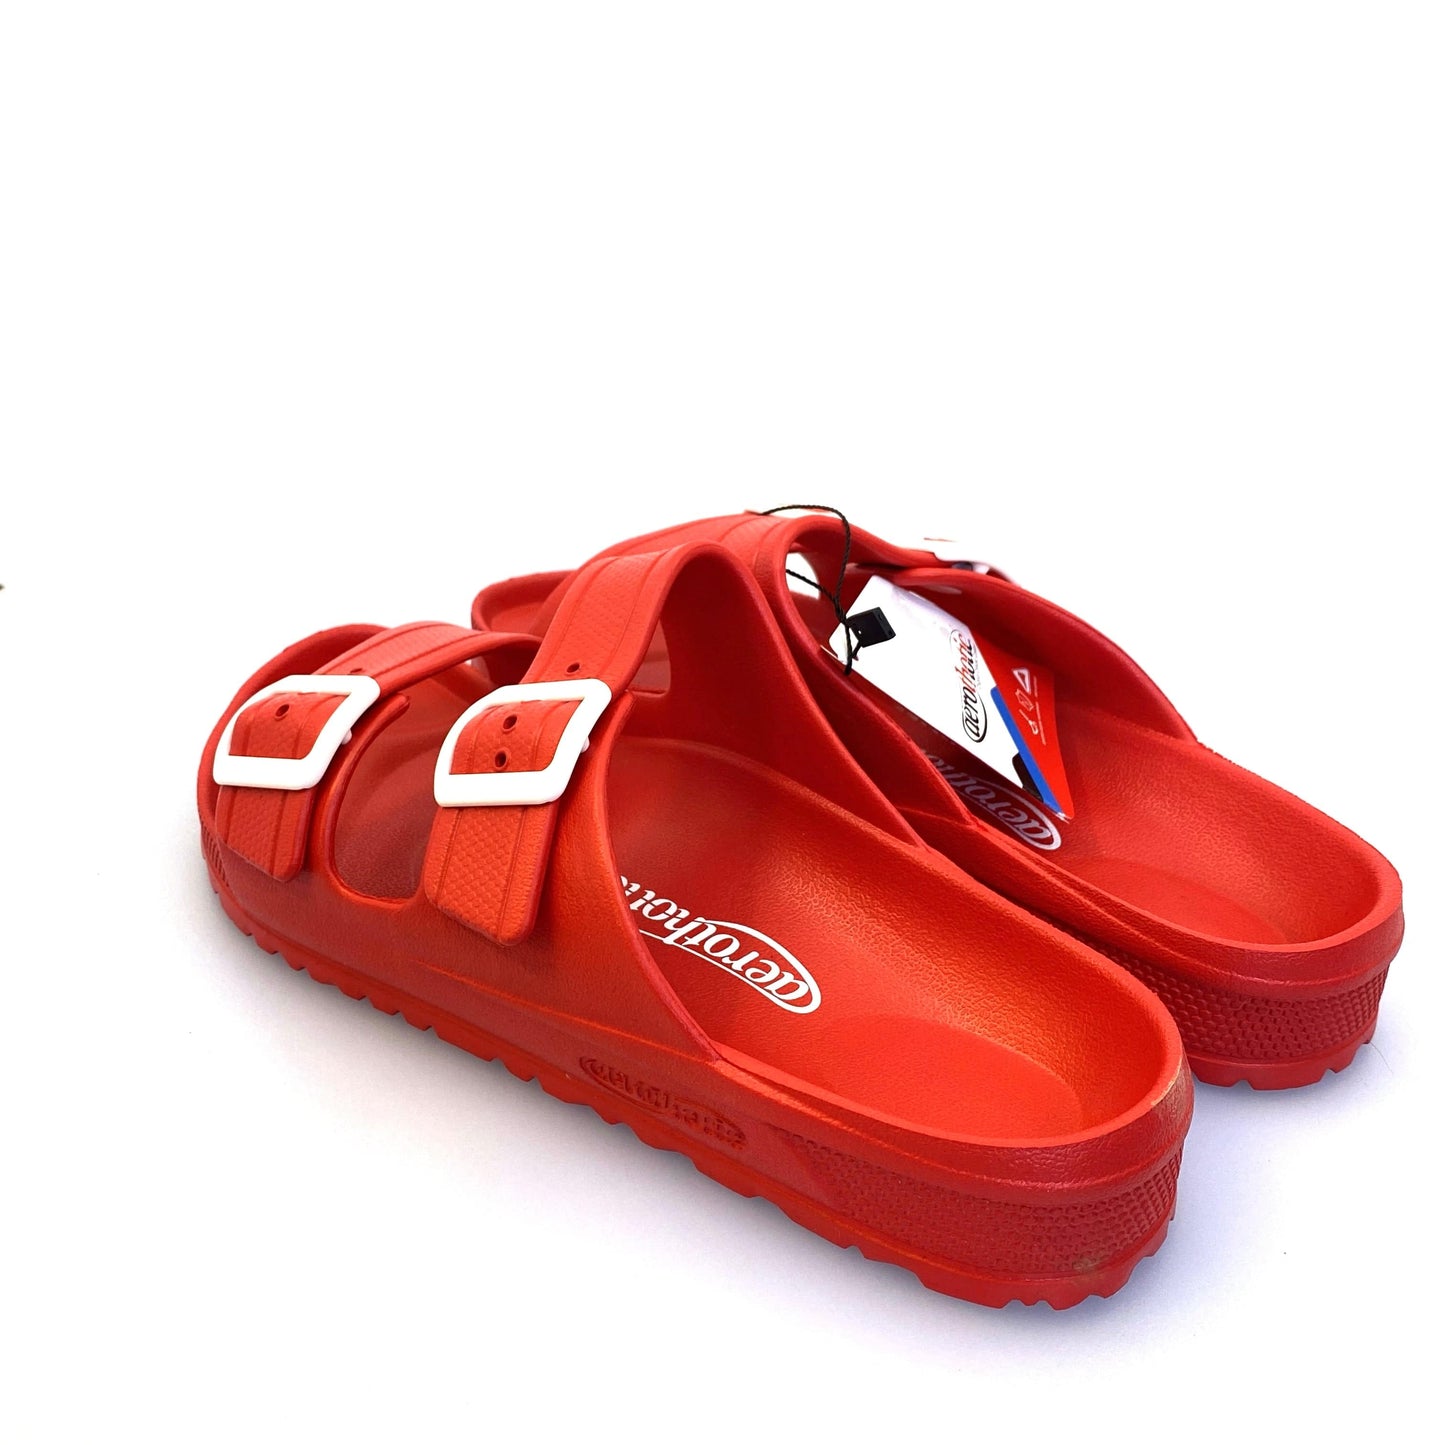 NEW Aerothotic Womens Orthotic Comfort Sandals, Red - Size 11